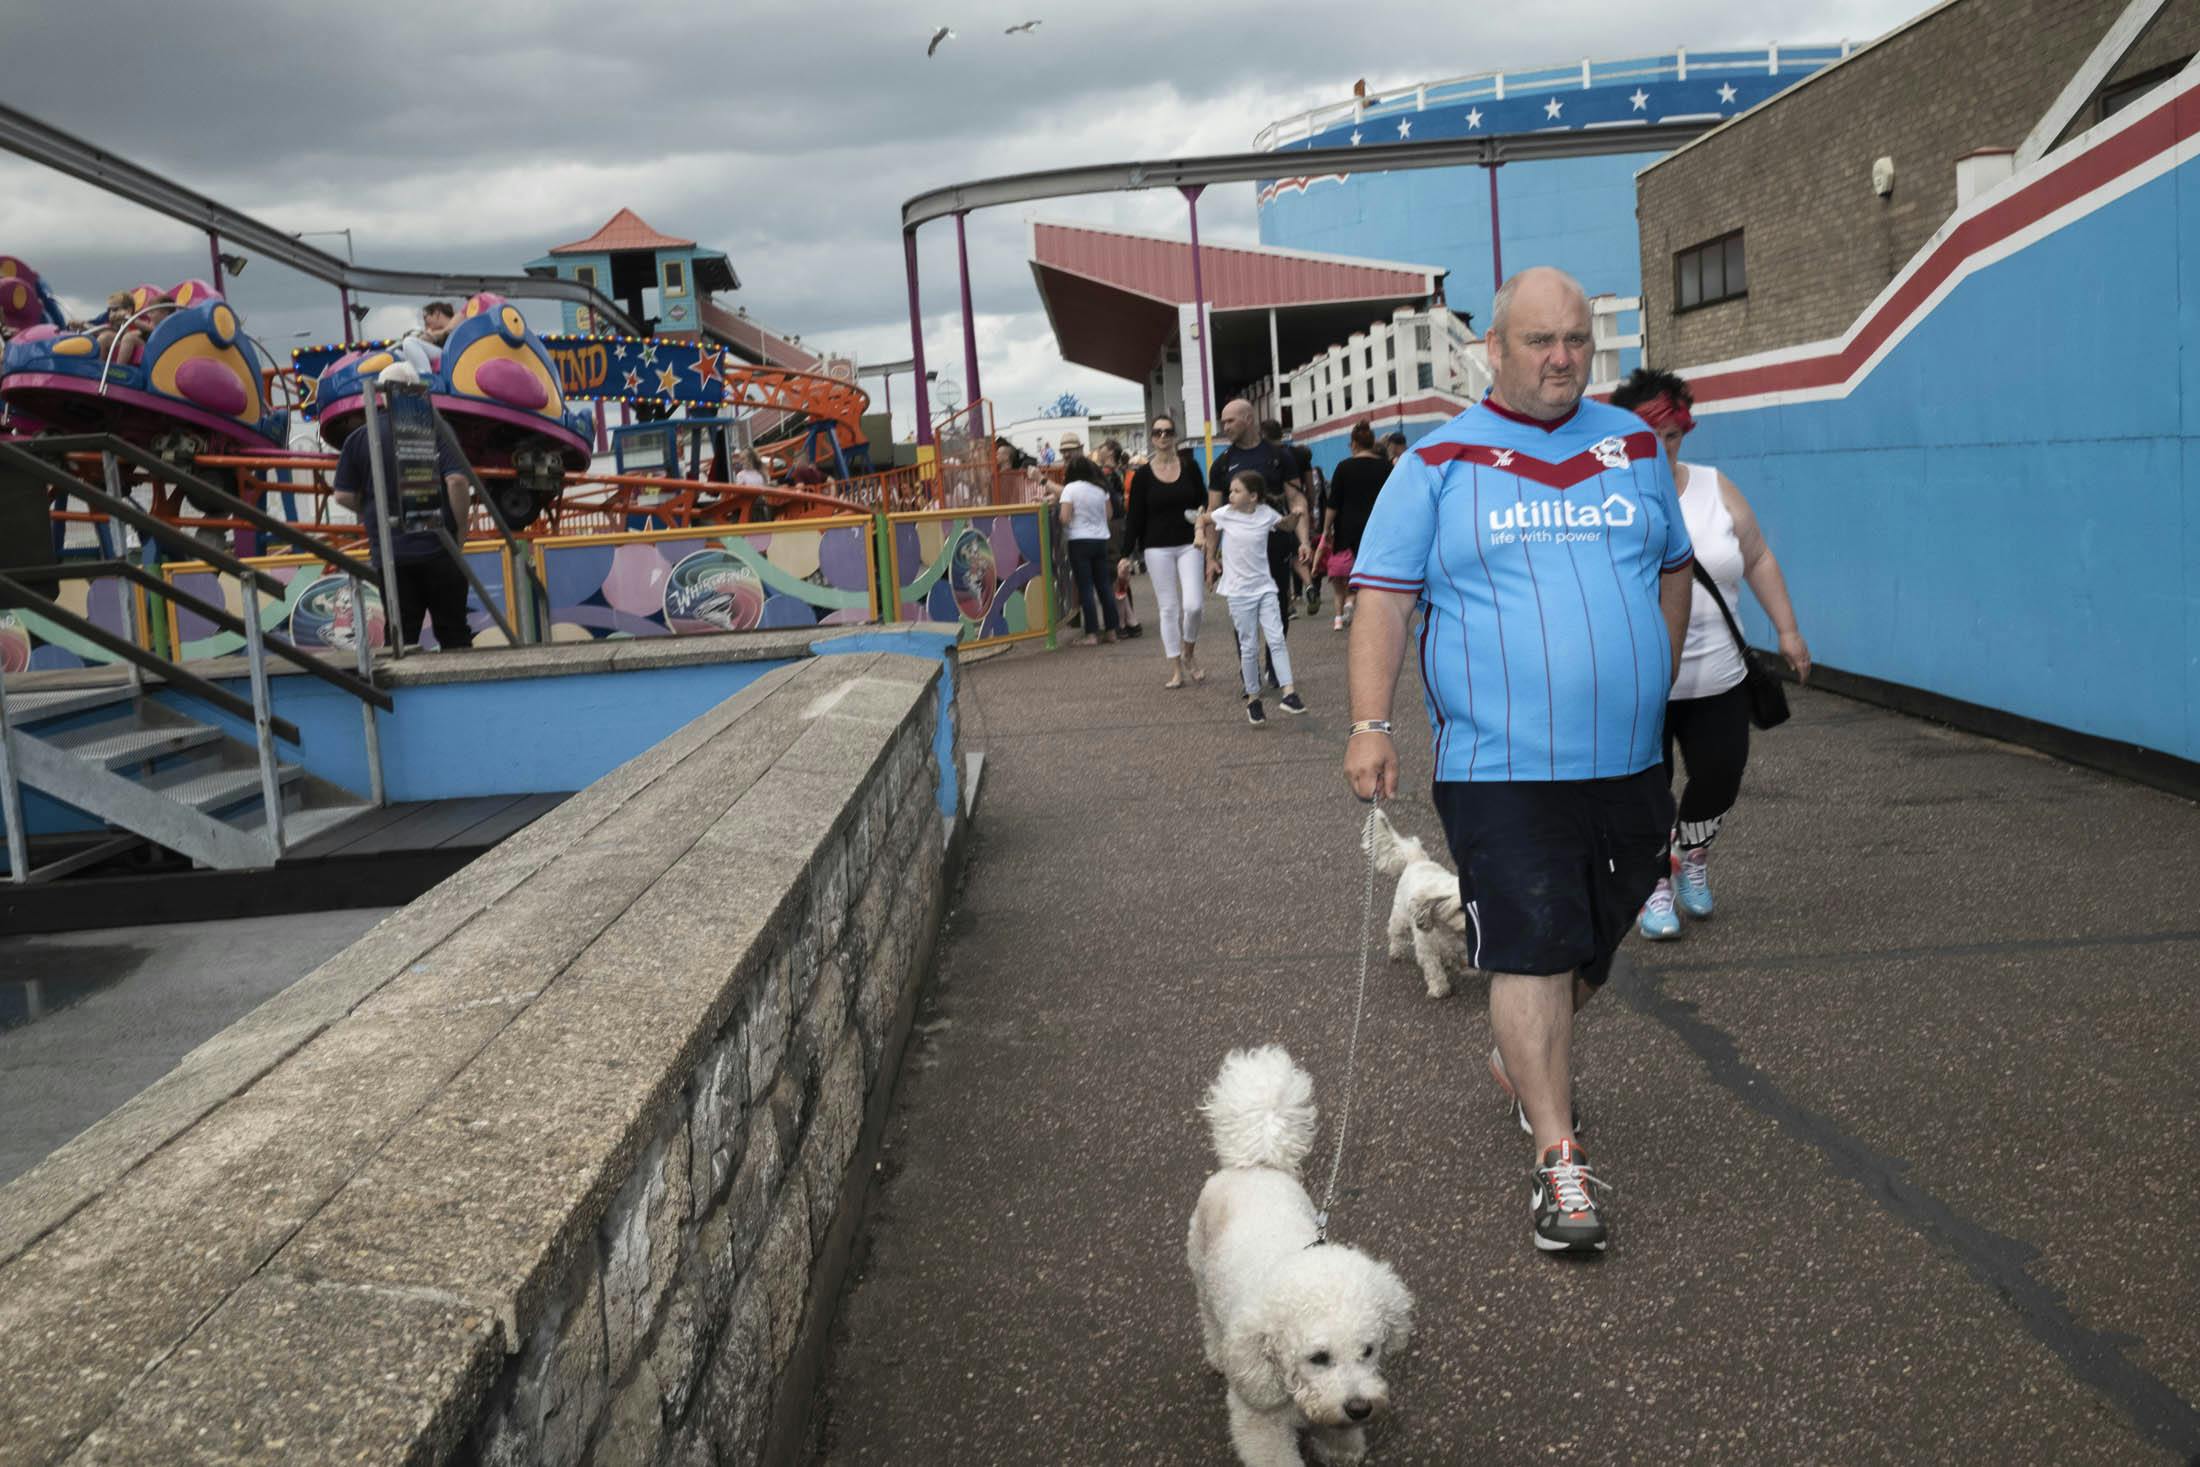 Man walking dog in amusement park wearing blue football soccer shirt that lines up with background